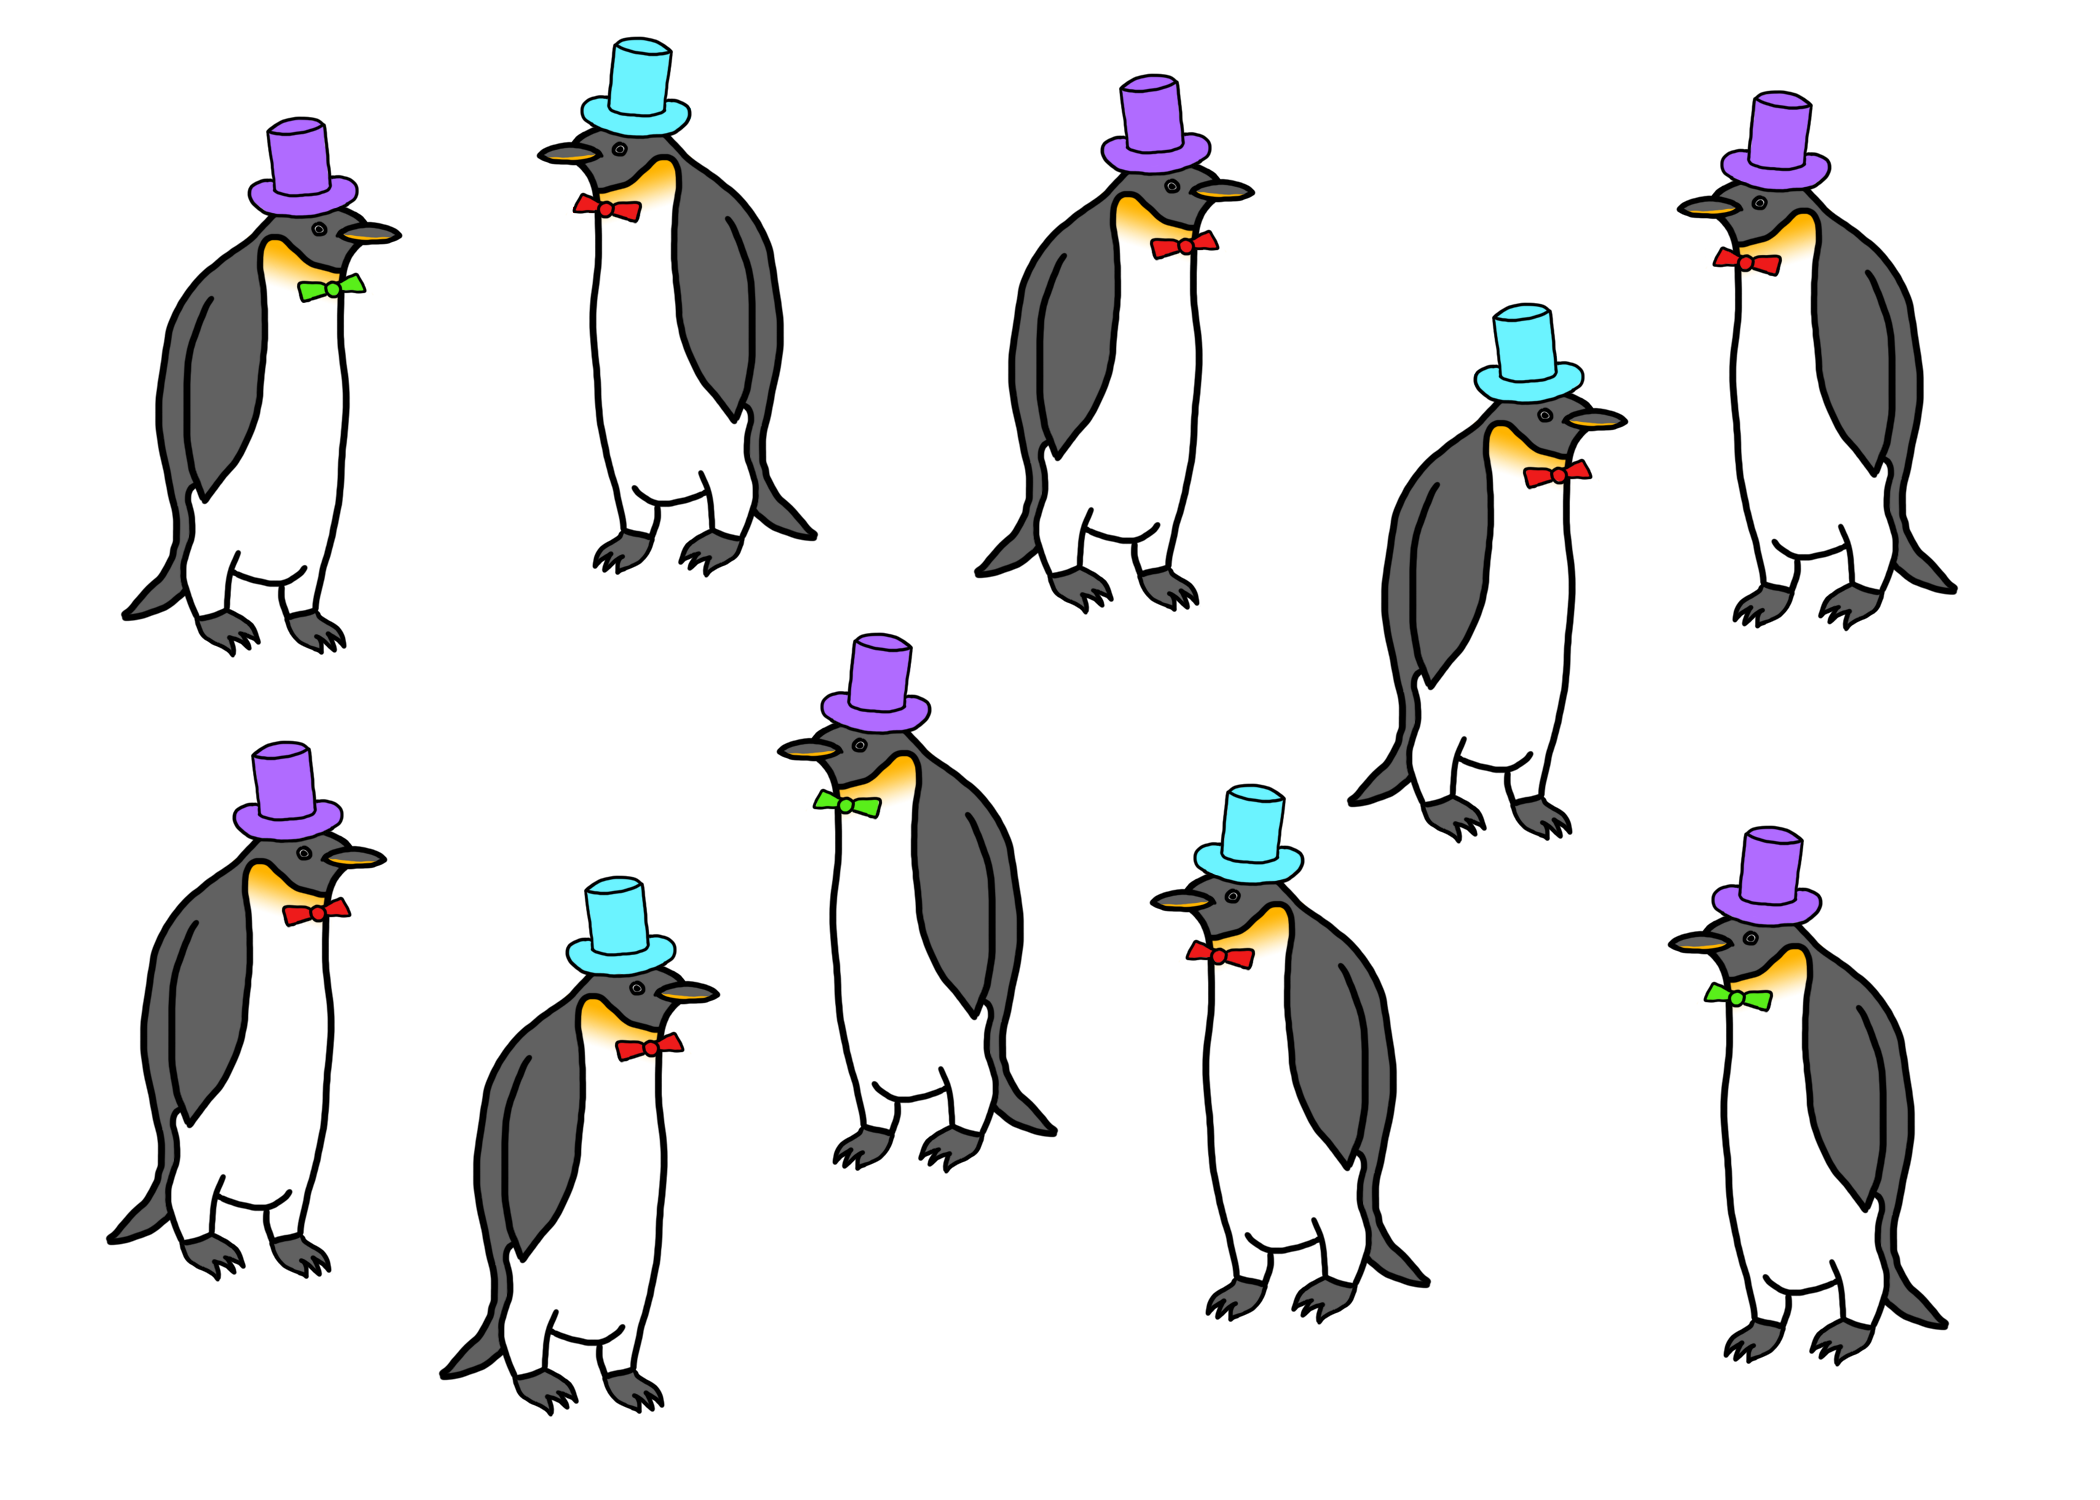 Population of Penguins with Turquoise and Purple Hats